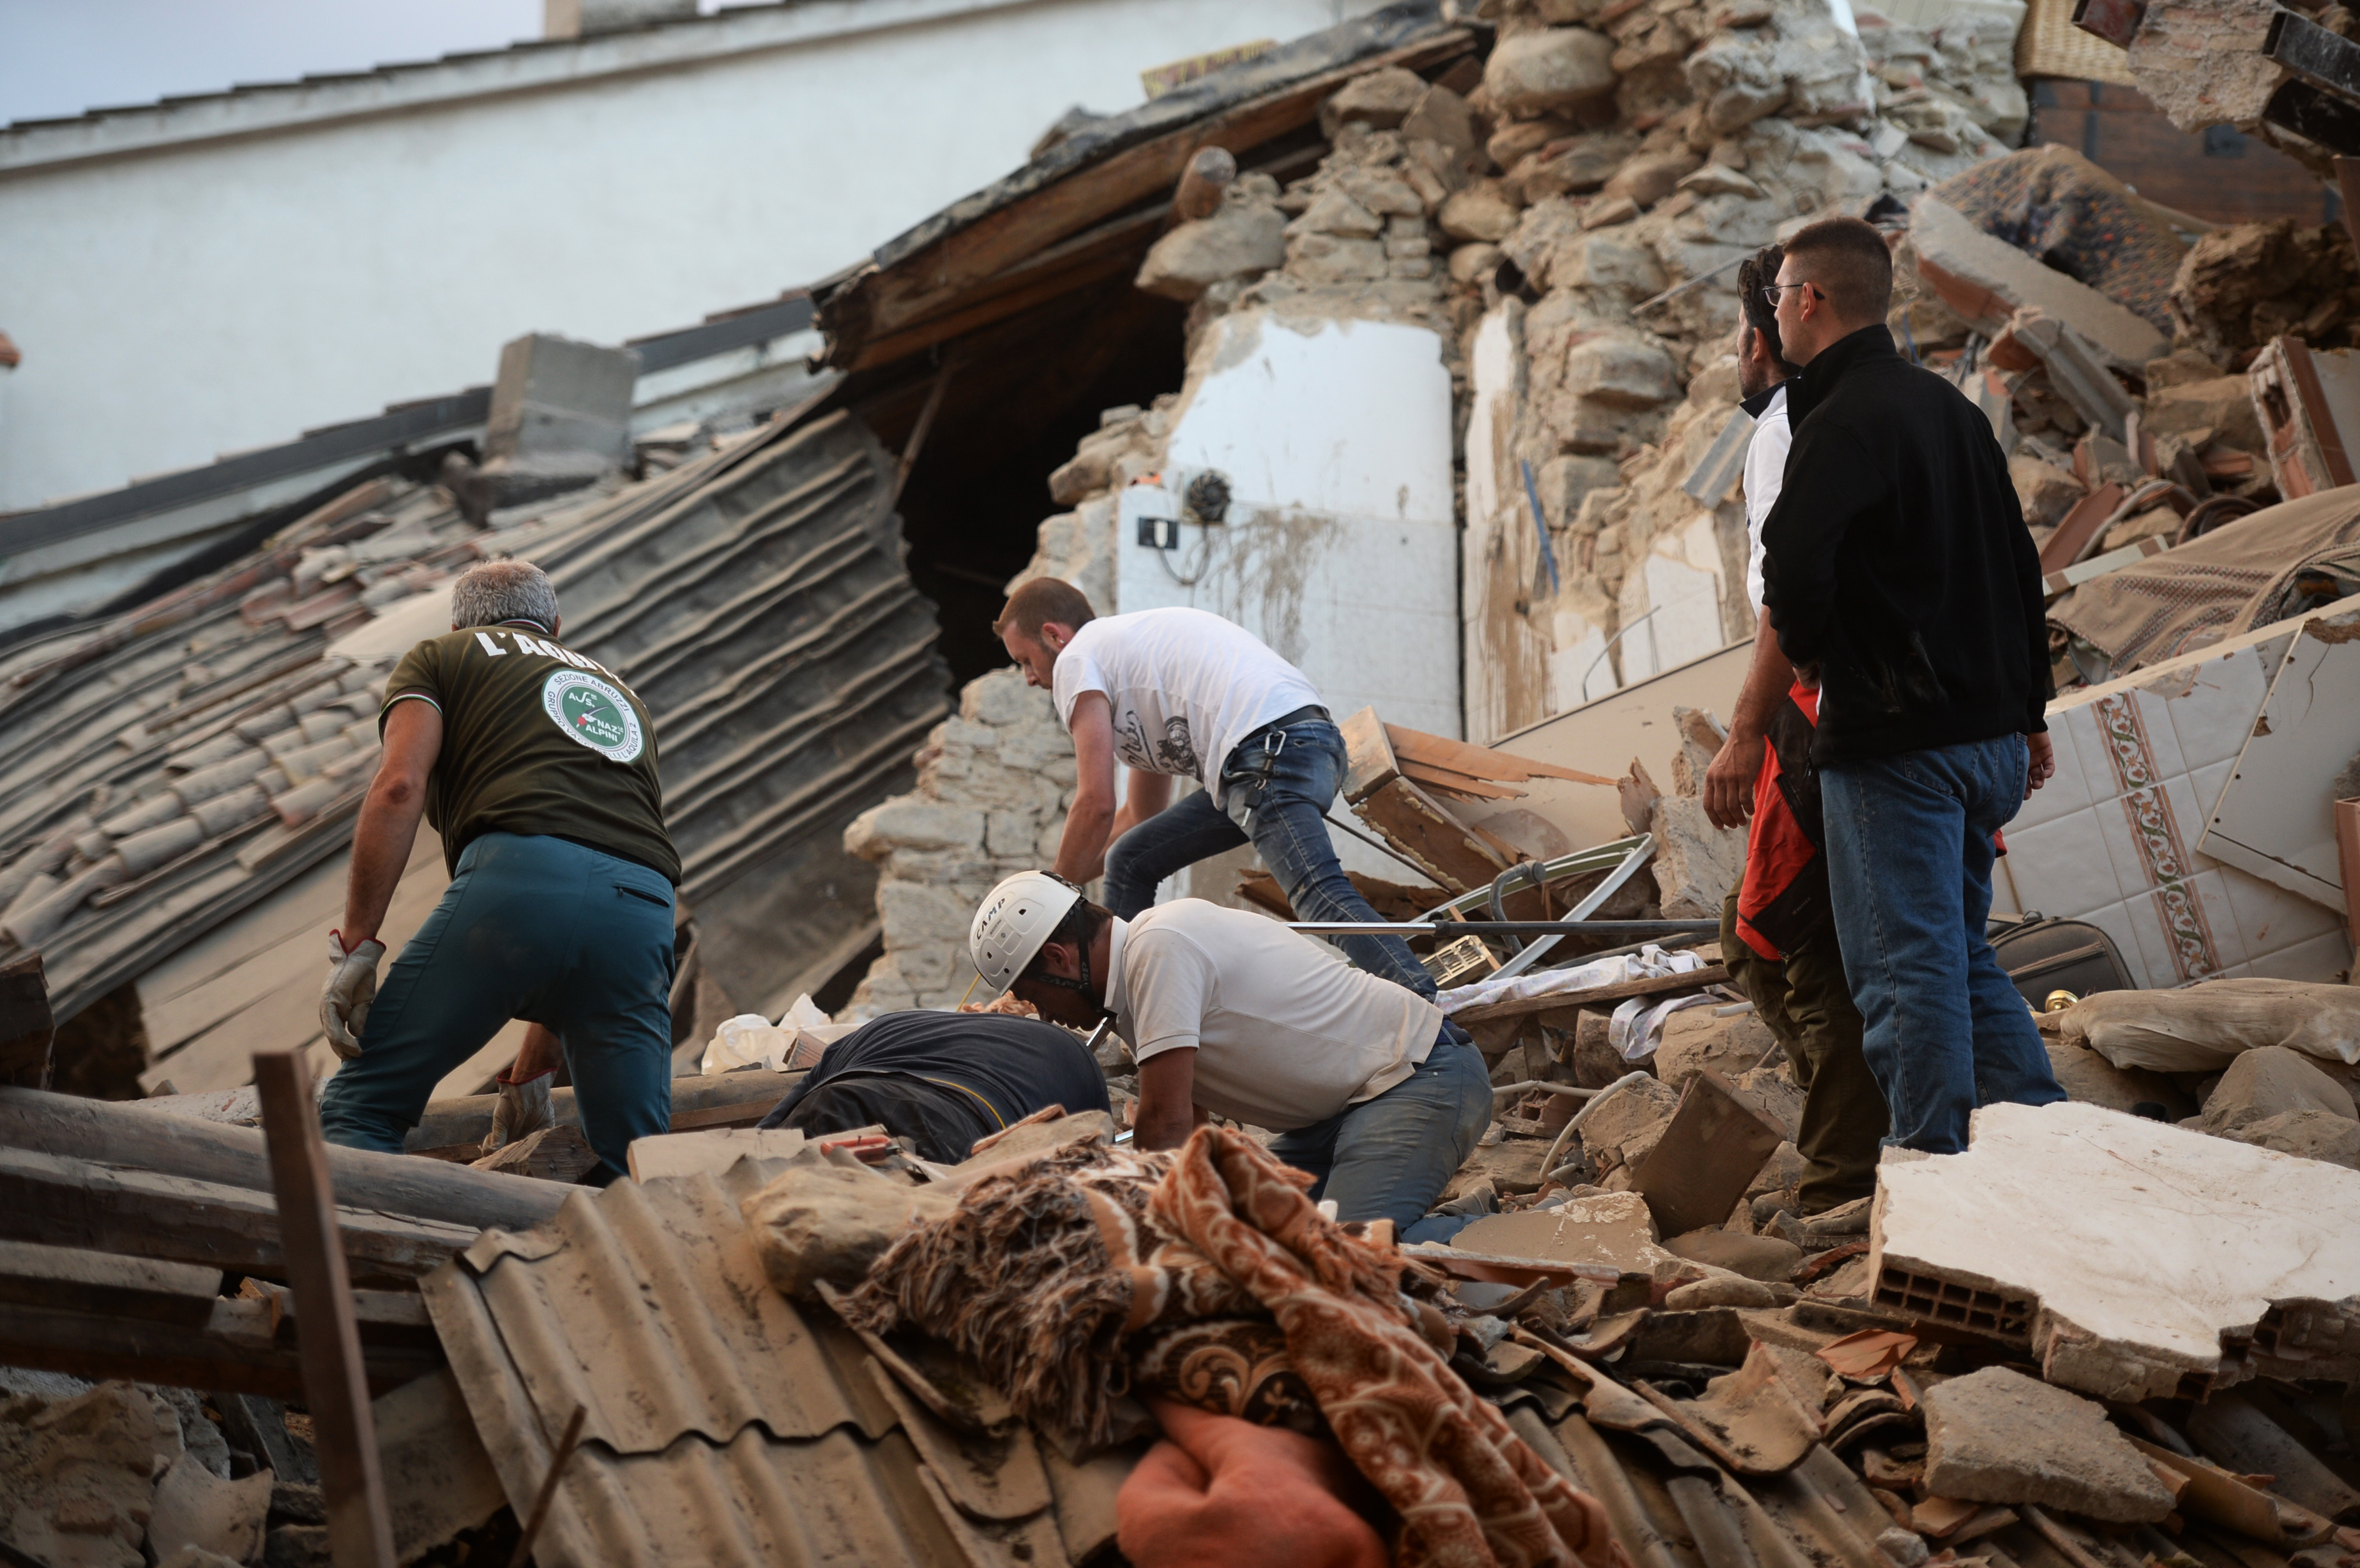 Rescuers and residents search for victims among damaged buildings after a strong heartquake hit Amatrice on August 24, 2016. Central Italy was struck by a powerful, 6.2-magnitude earthquake in the early hours, which has killed at least three people and devastated dozens of mountain villages. Numerous buildings had collapsed in communities close to the epicenter of the quake near the town of Norcia in the region of Umbria, witnesses told Italian media, with an increase in the death toll highly likely. / AFP PHOTO / FILIPPO MONTEFORTE